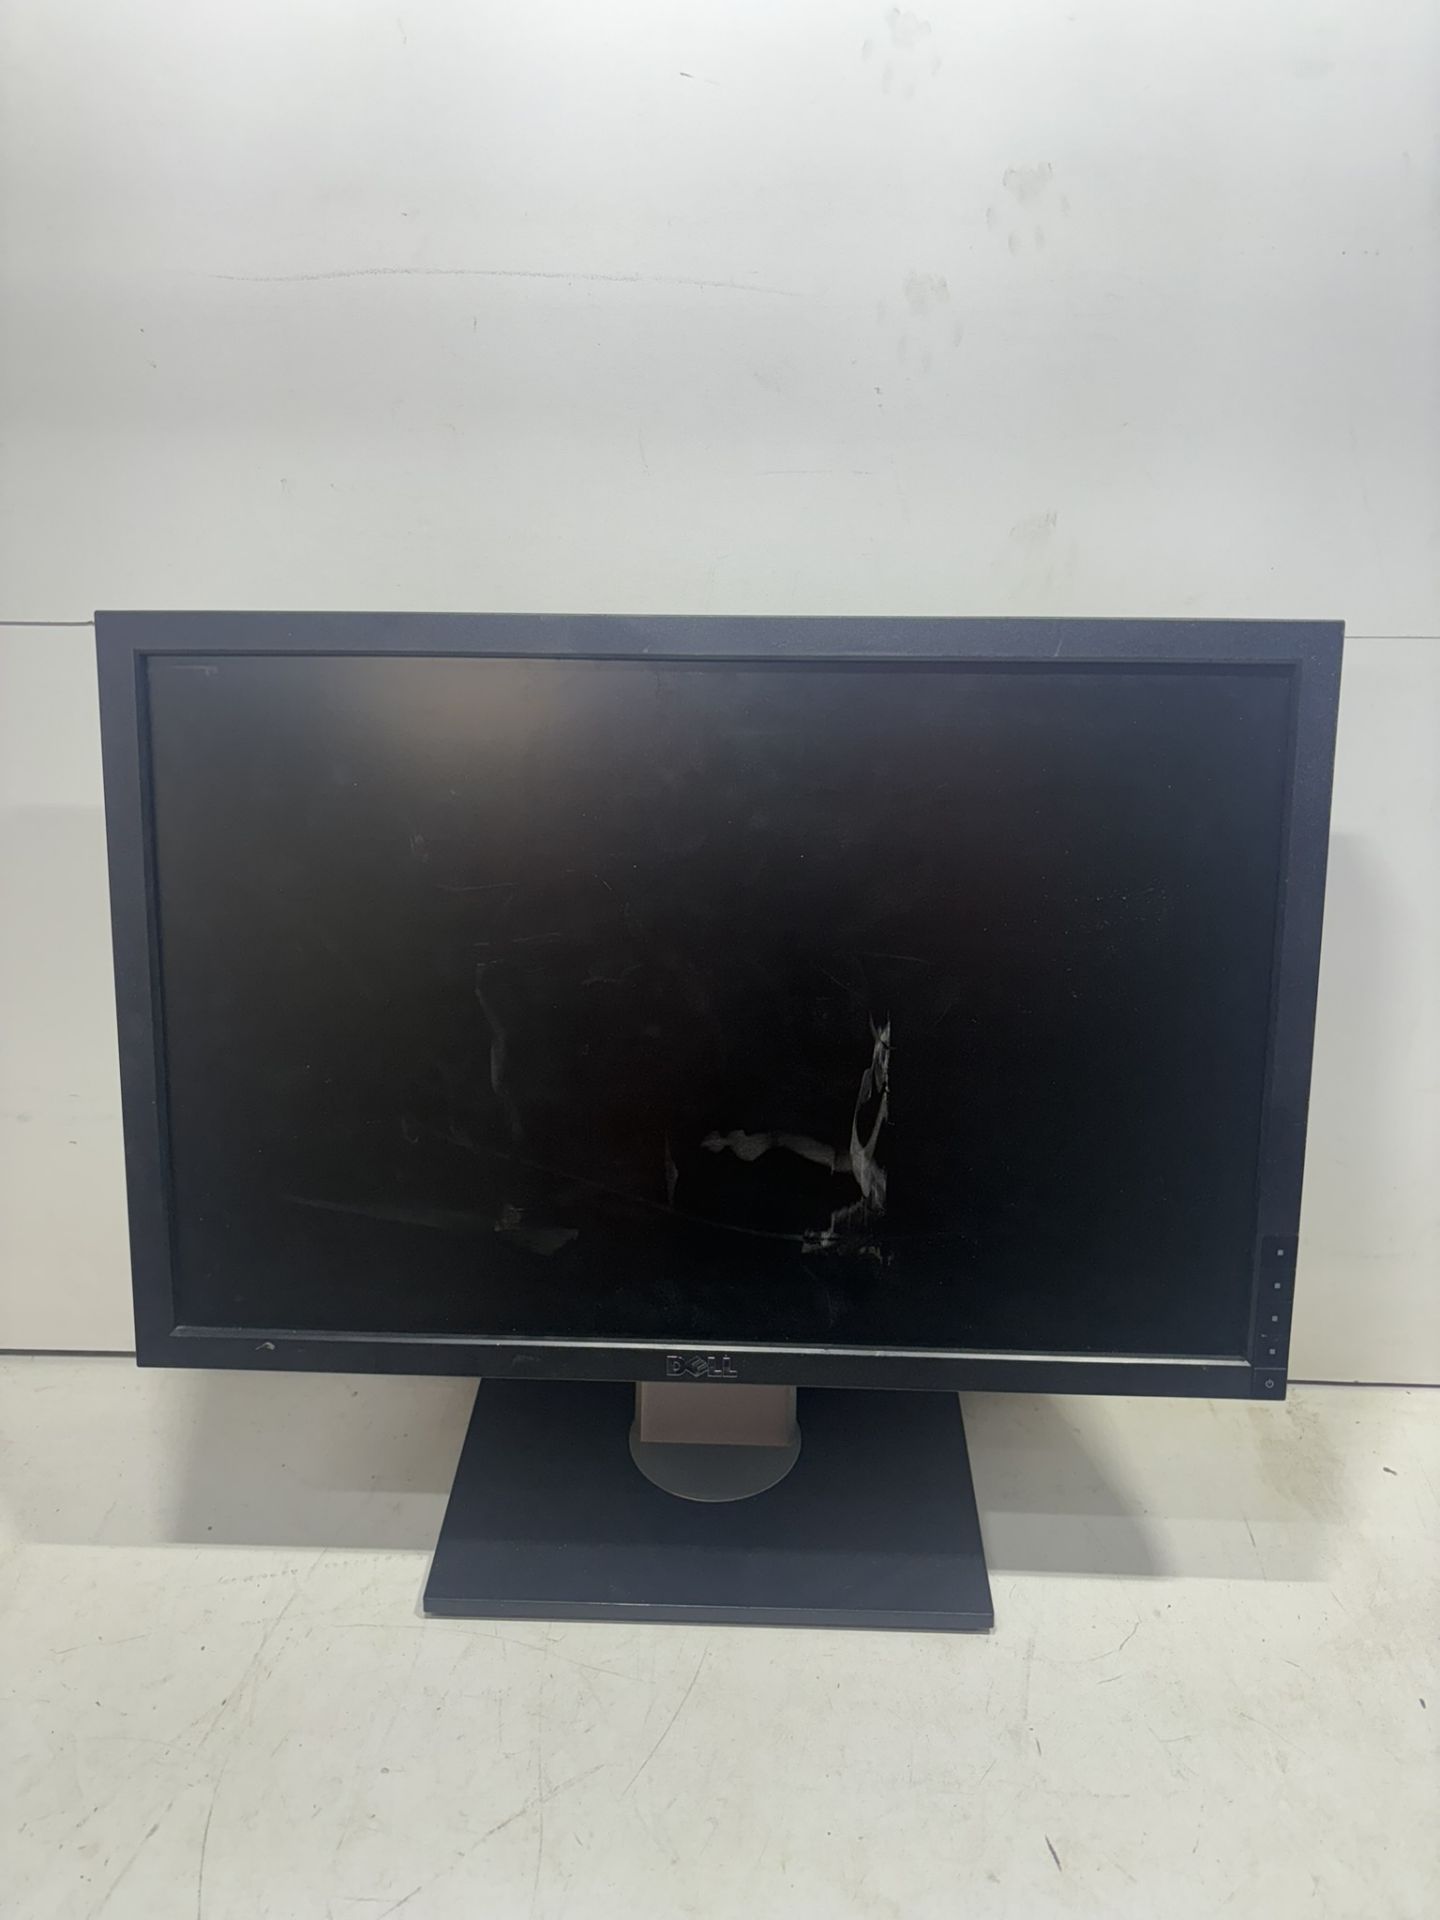 2 x Dell P2210f 22? Widescreen Height Adjustable Monitors - Image 2 of 7